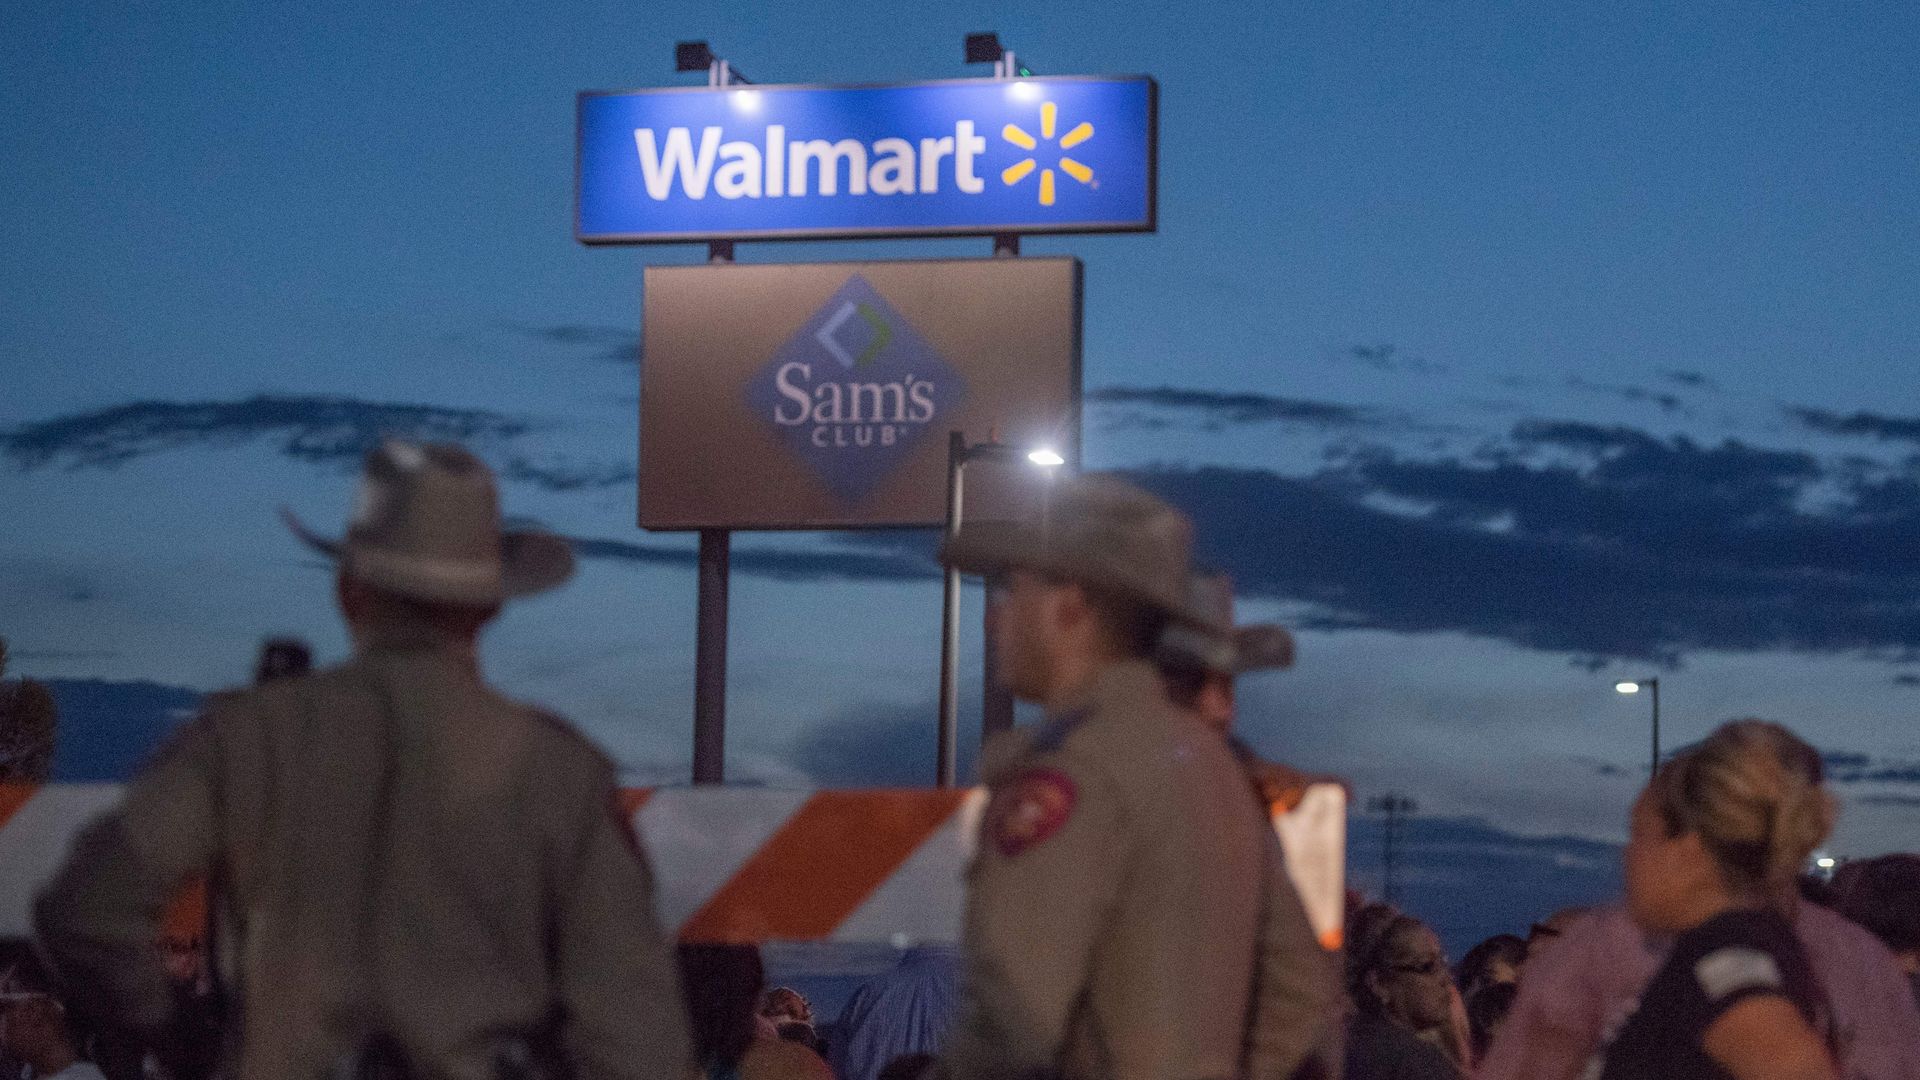 In this image, law enforcement stand in a Walmart parking lot at night. The Walmart logo is on a tall sign behind them.